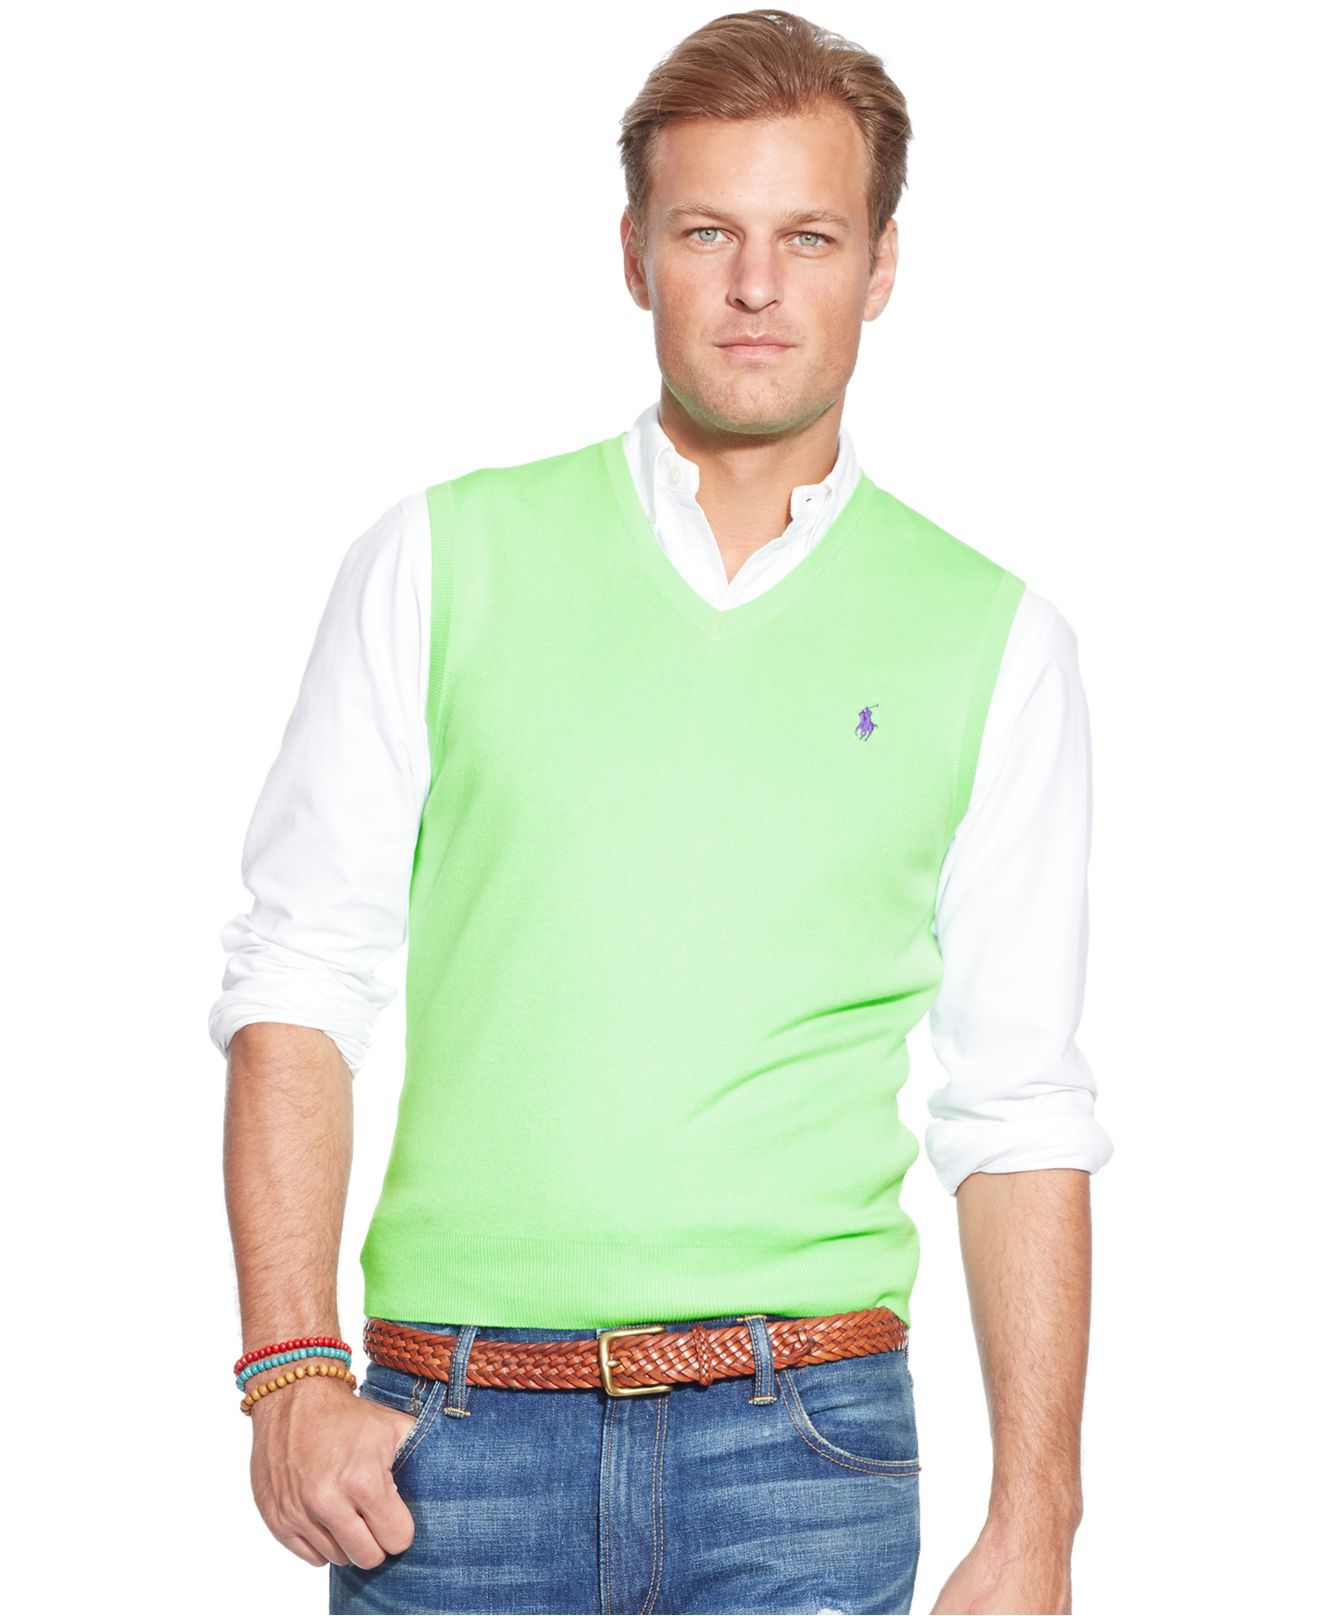 Lyst - Polo Ralph Lauren Big And Tall Pima Cotton V-Neck Sweater Vest ...